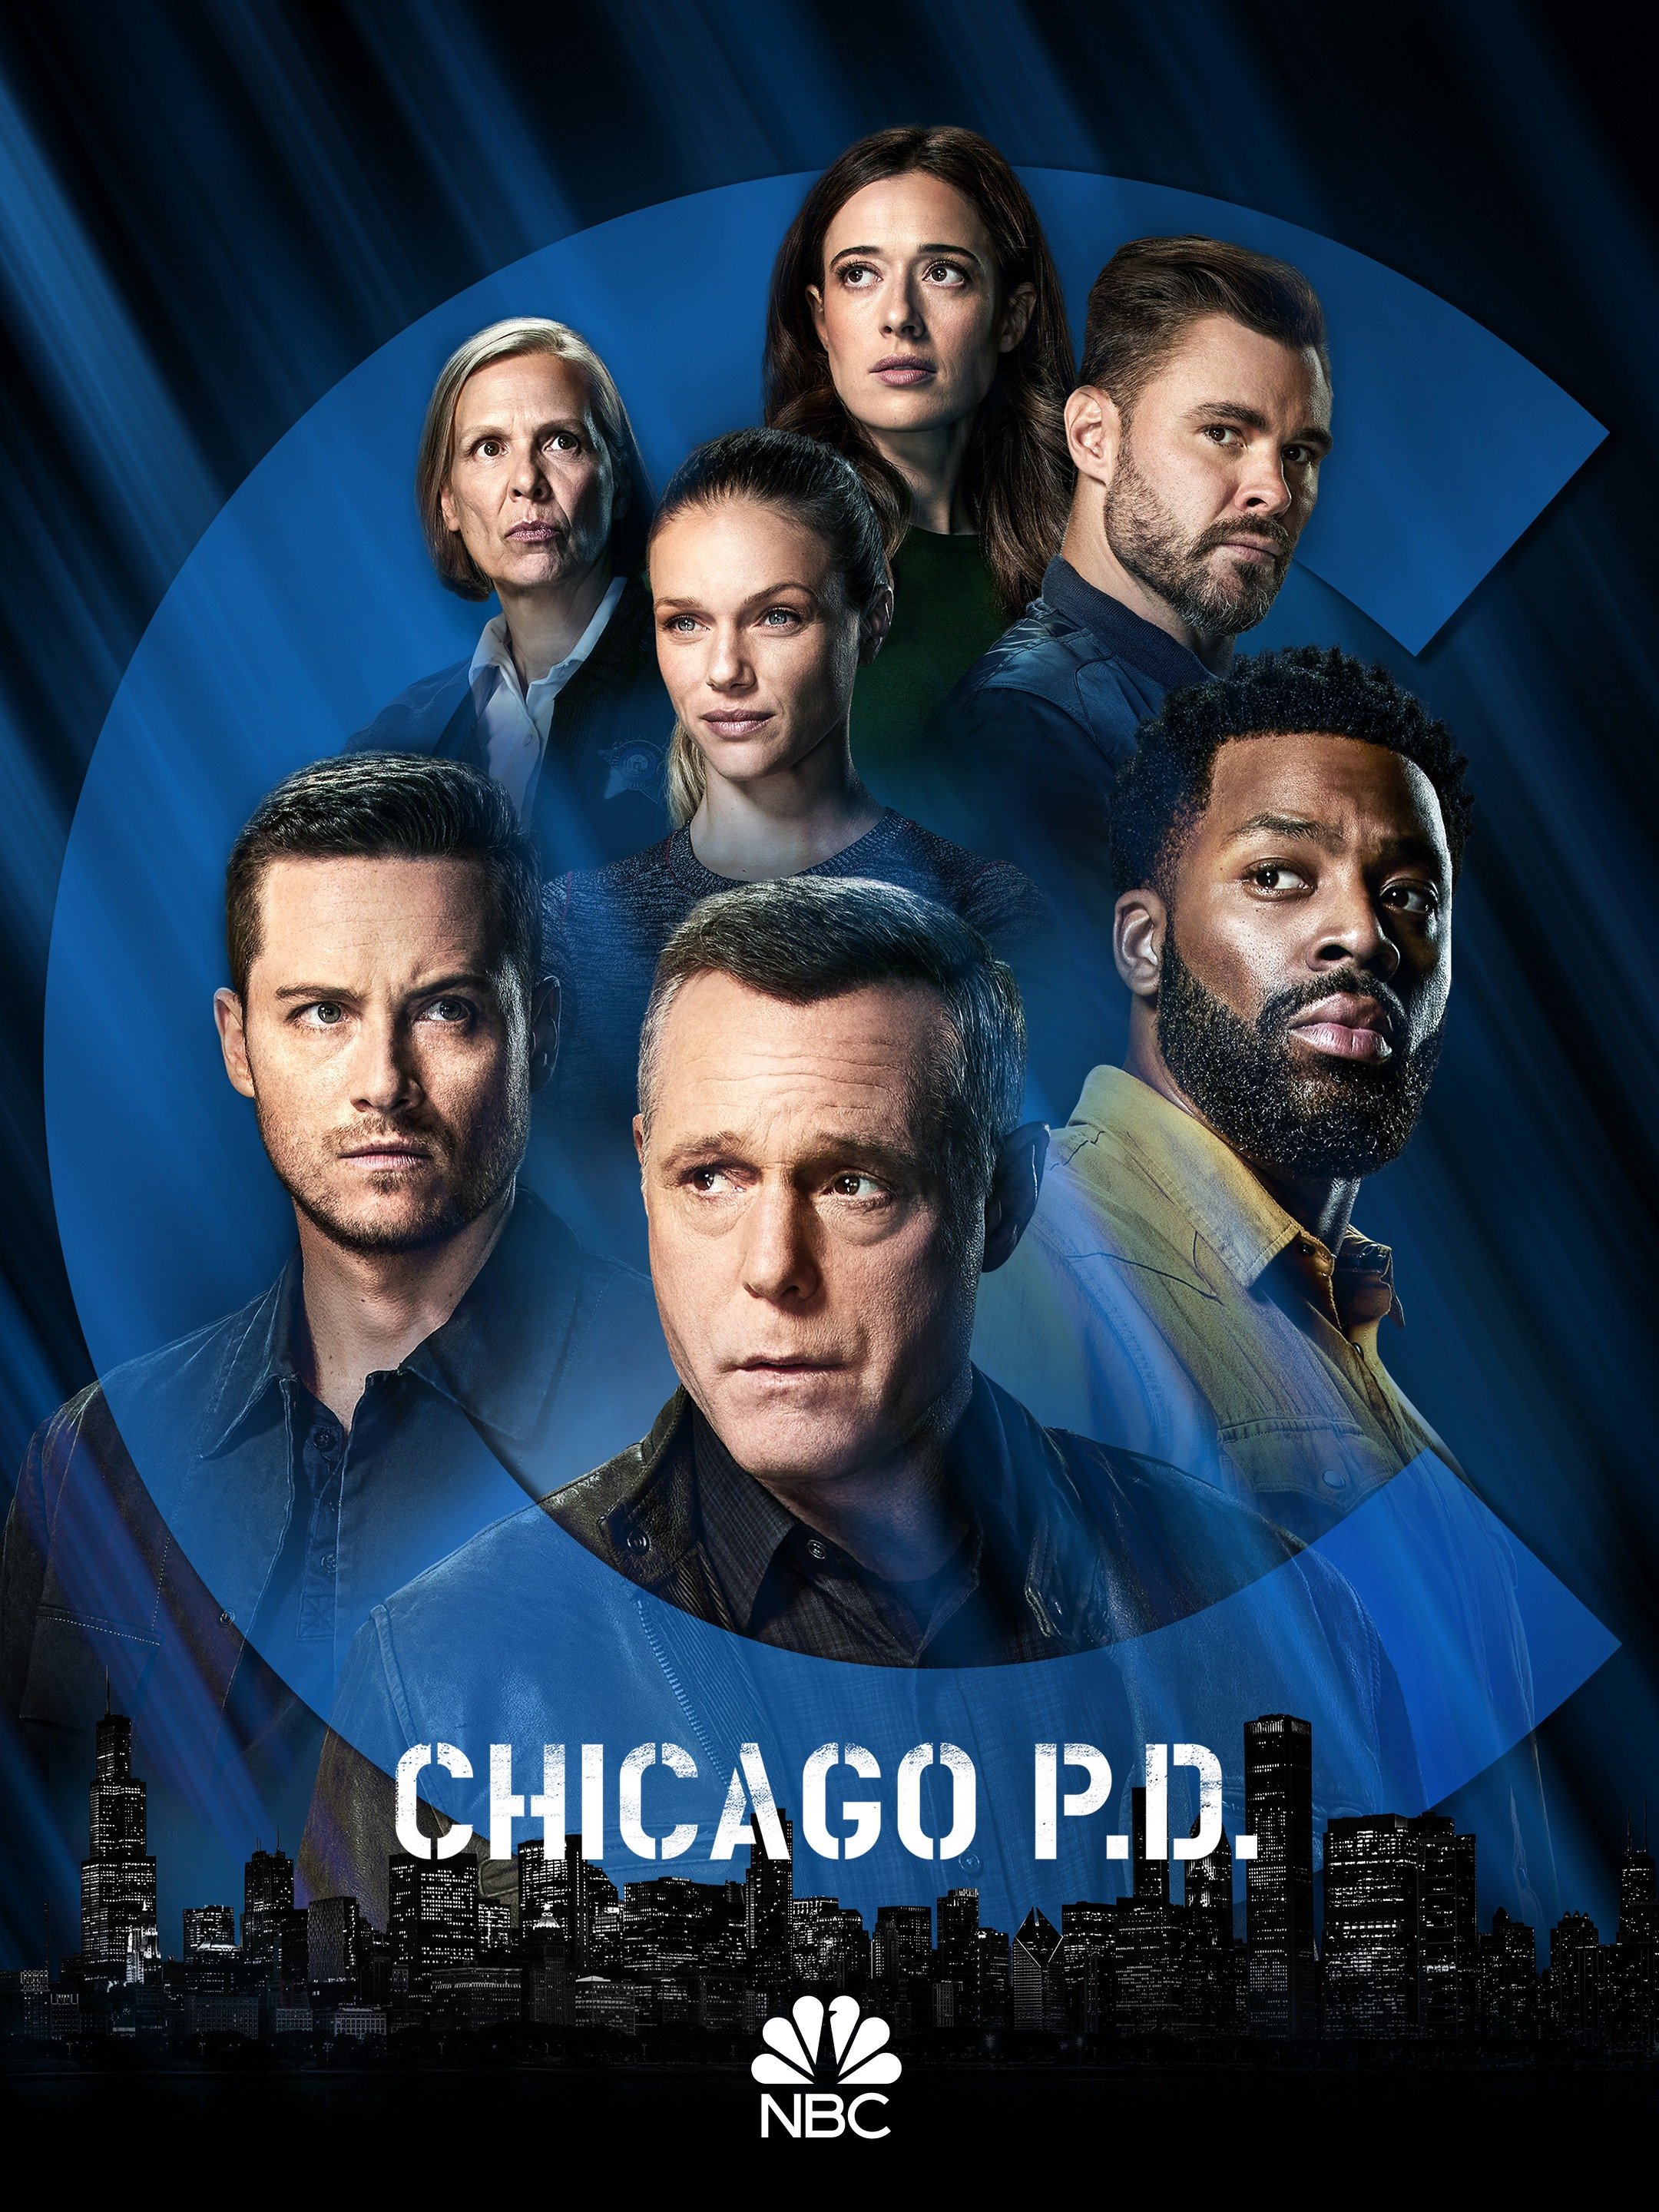 Cast Of Chicago Pd | peacecommission.kdsg.gov.ng